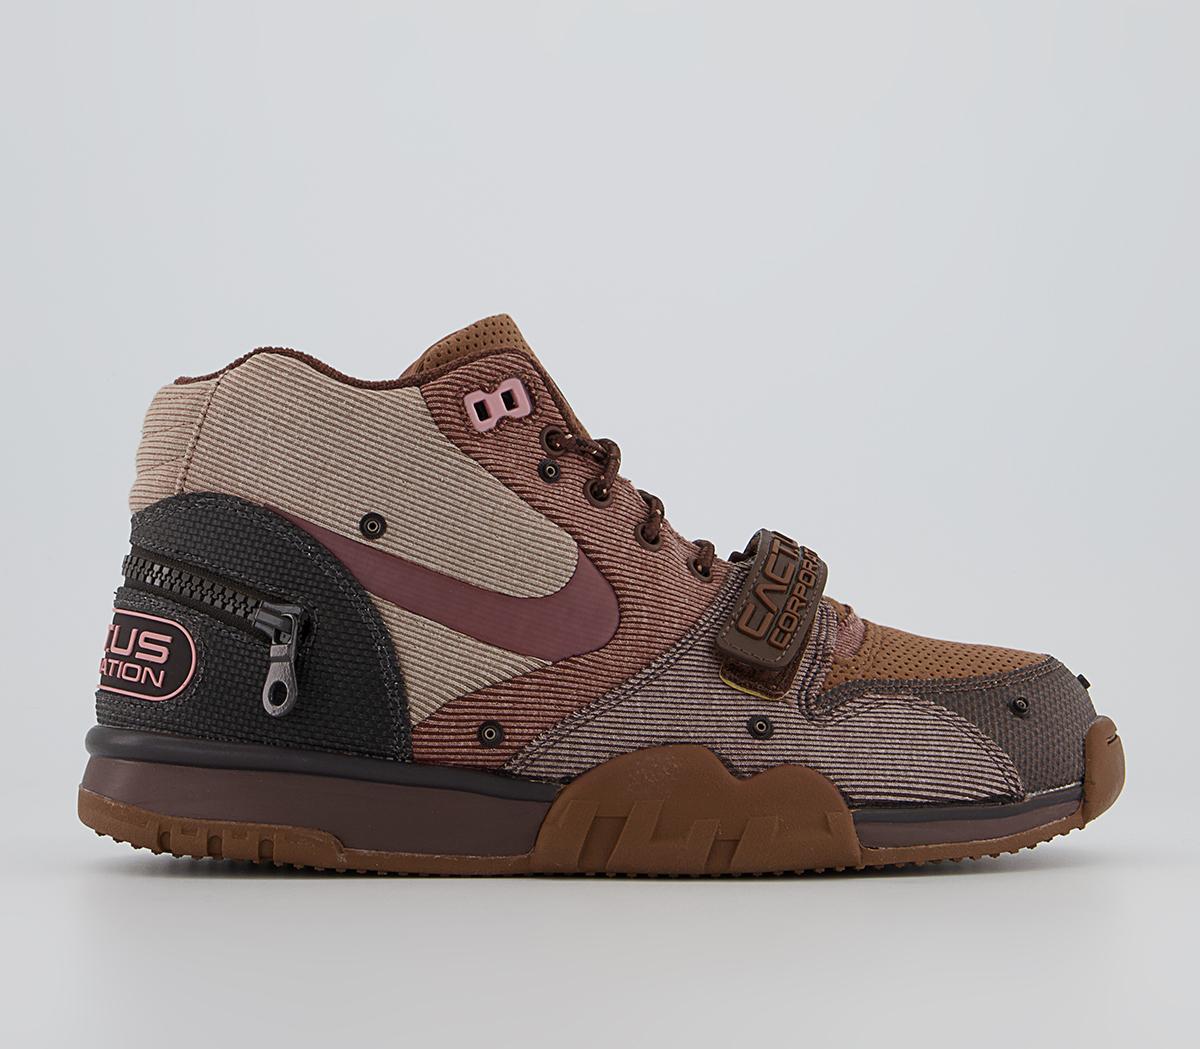 Nike Air Trainer 1 Cactus Jack Trainers Light Chocolate Rust Pink ...